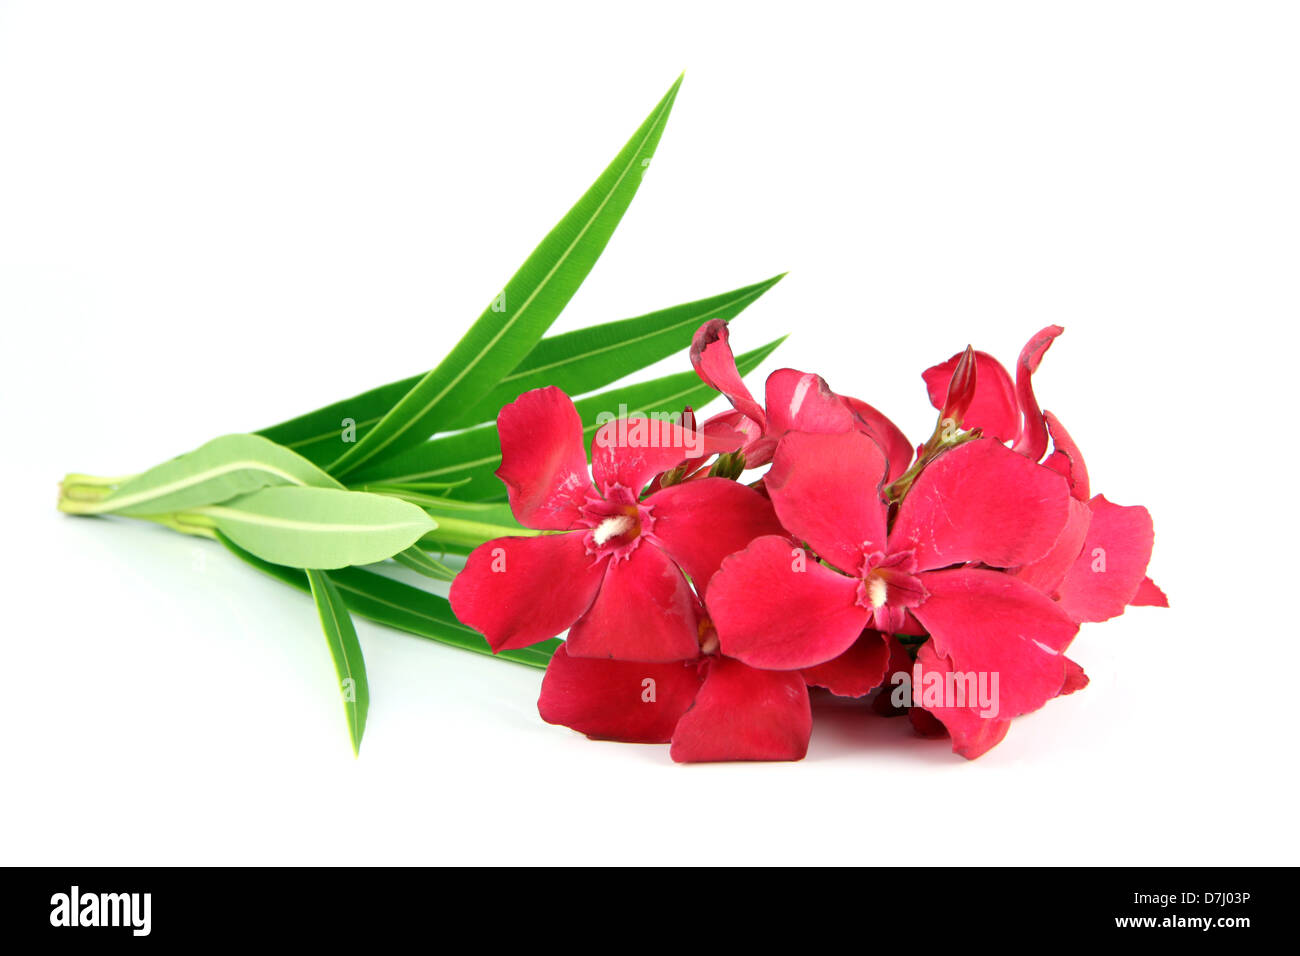 Bouquet of red flowers on a white background. Stock Photo